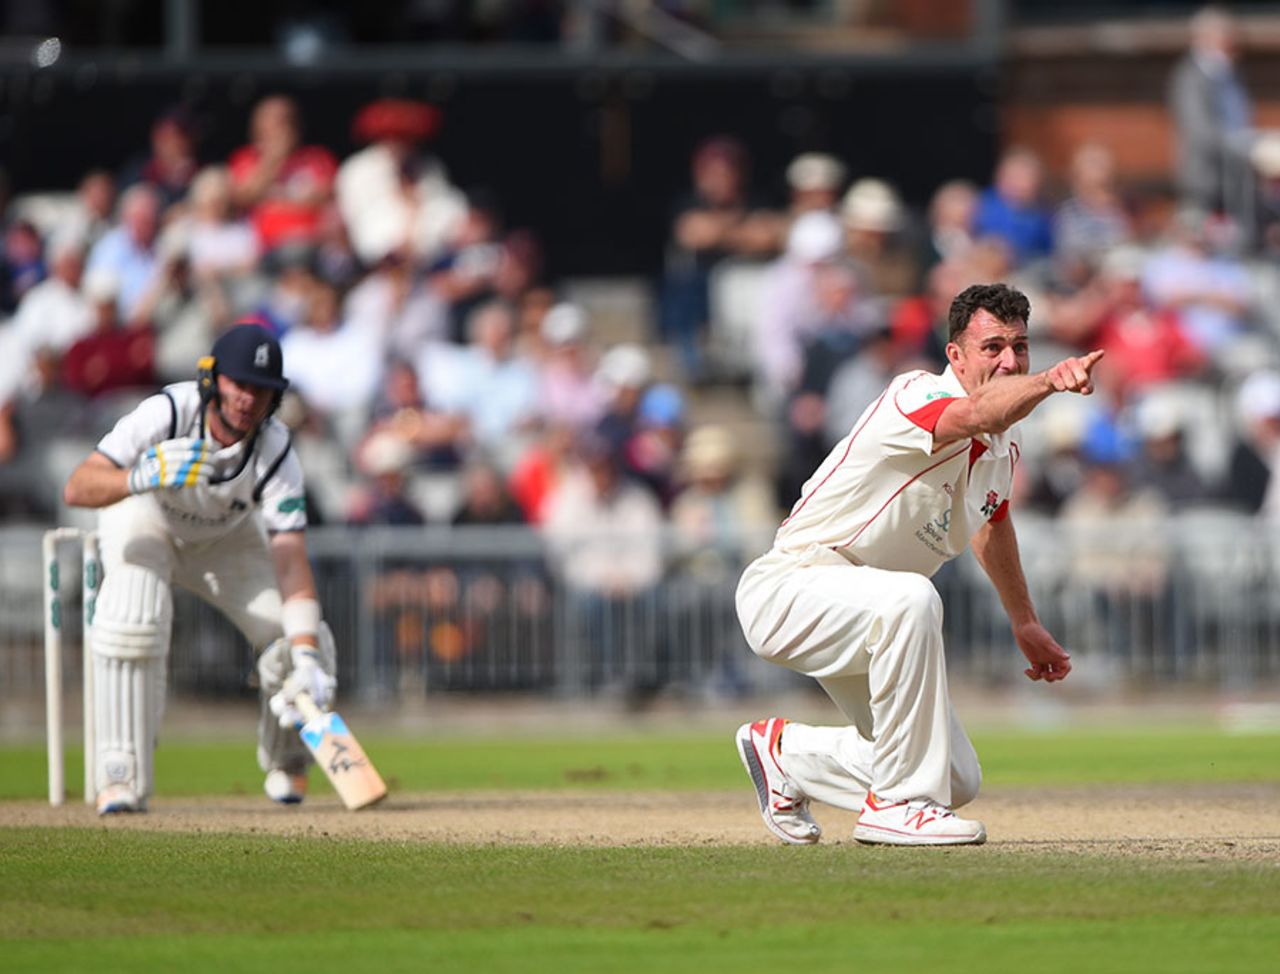 Ryan McLaren appeals for the wicket of Ian Bell, Lancashire v Warwickshire, Specsavers County Championship, Division One, Old Trafford, 3rd day, August 30, 2017